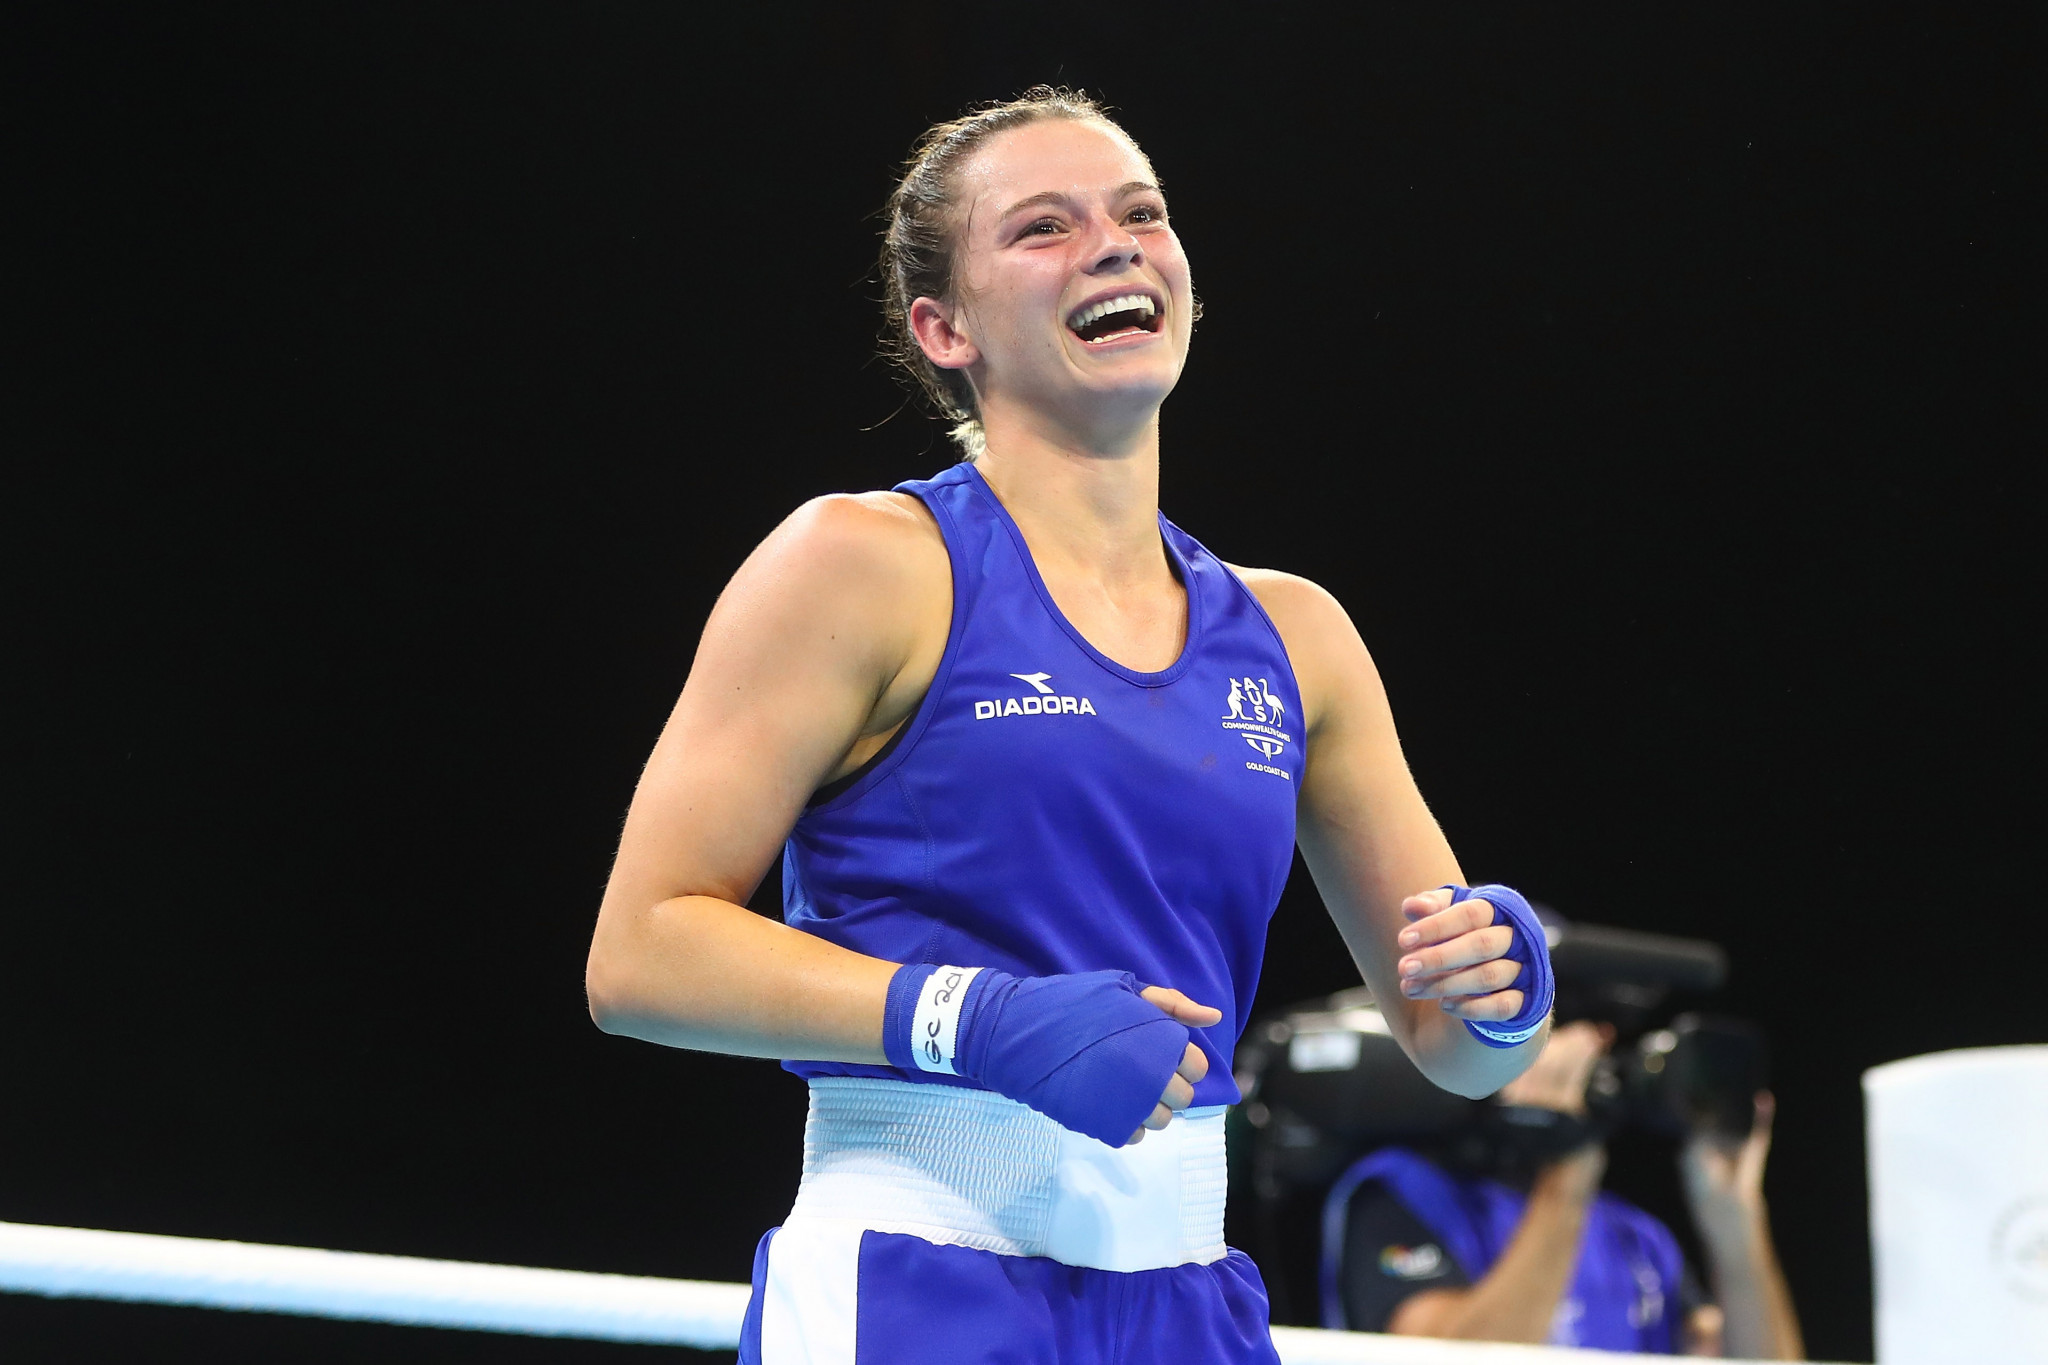 Skye Nicolson was among those to win bouts on the third day of competition ©Getty Images